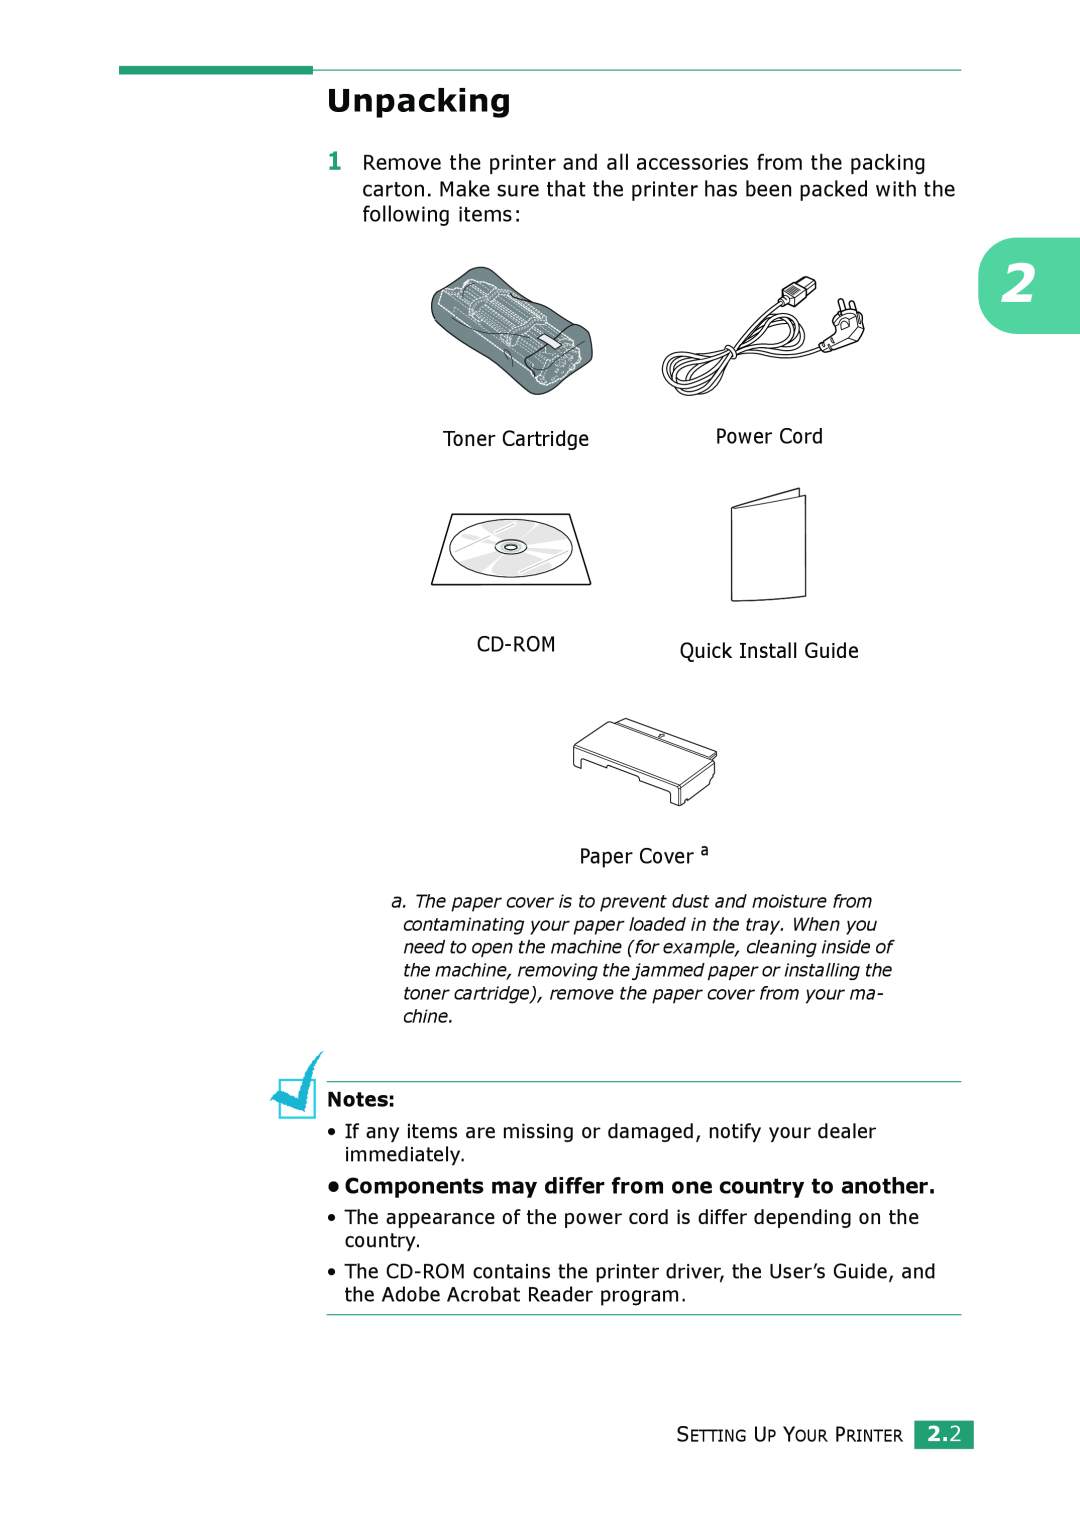 Samsung ML-1610 manual Unpacking, Components may differ from one country to another 